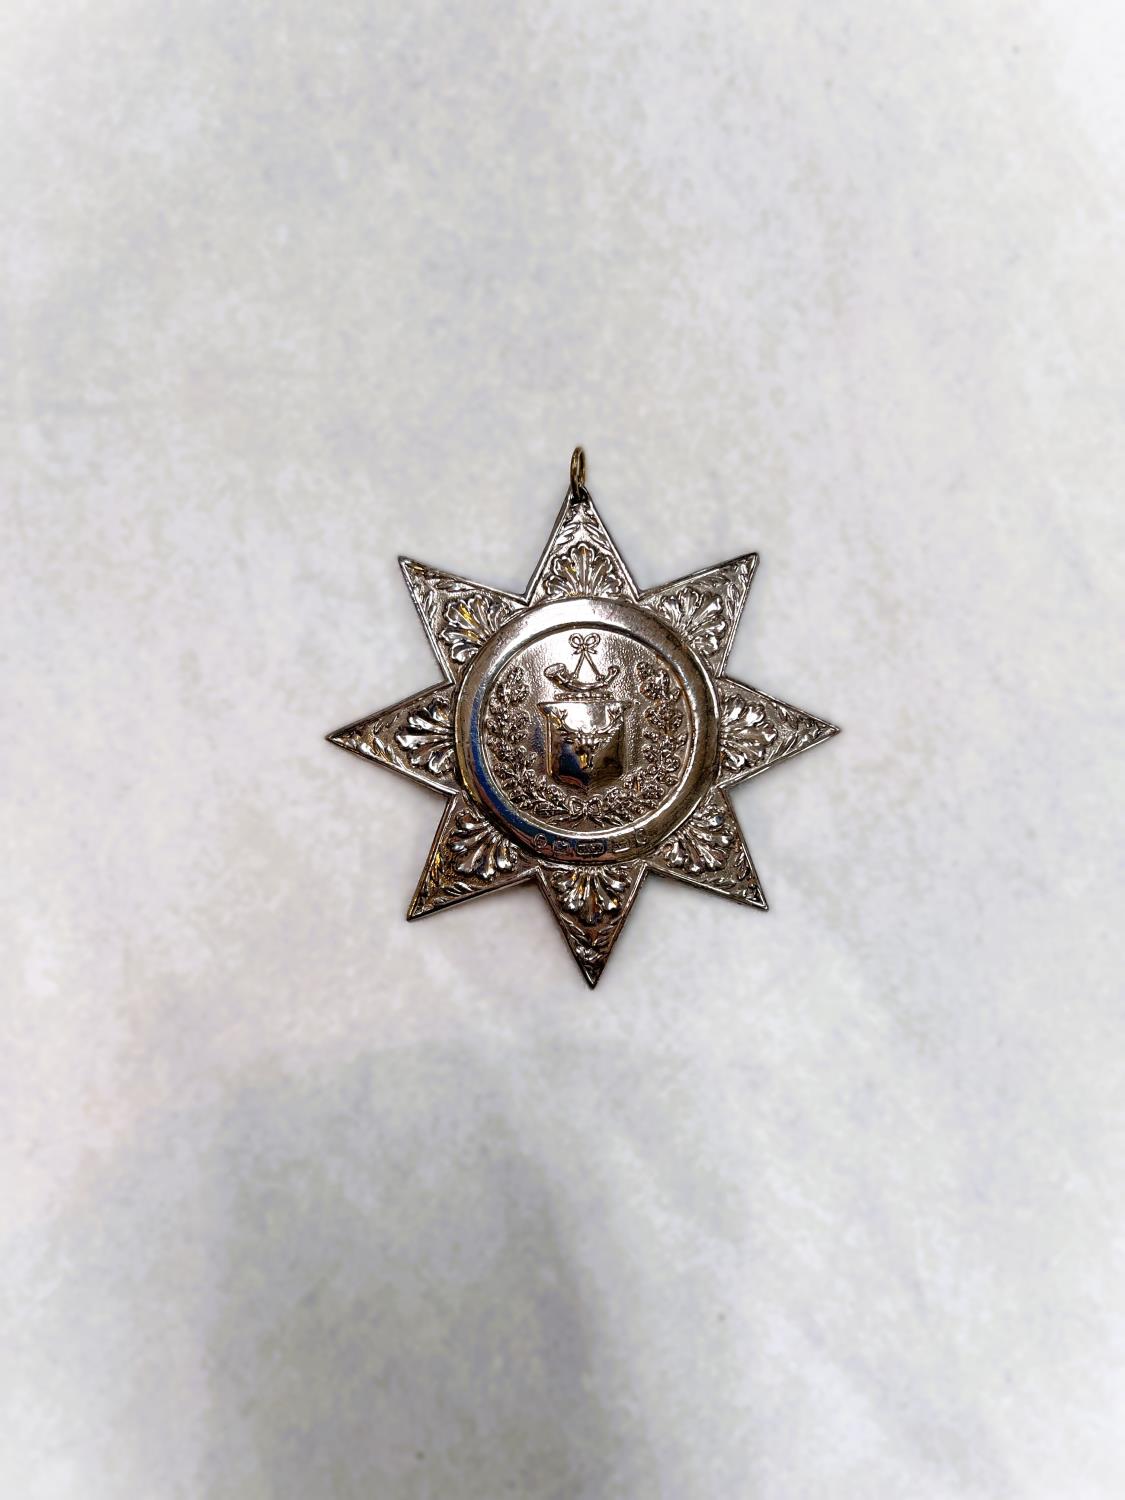 A hallmarked silver star shaped sash buckle, Ancient Order of Foresters, Hilliard & Thomason,